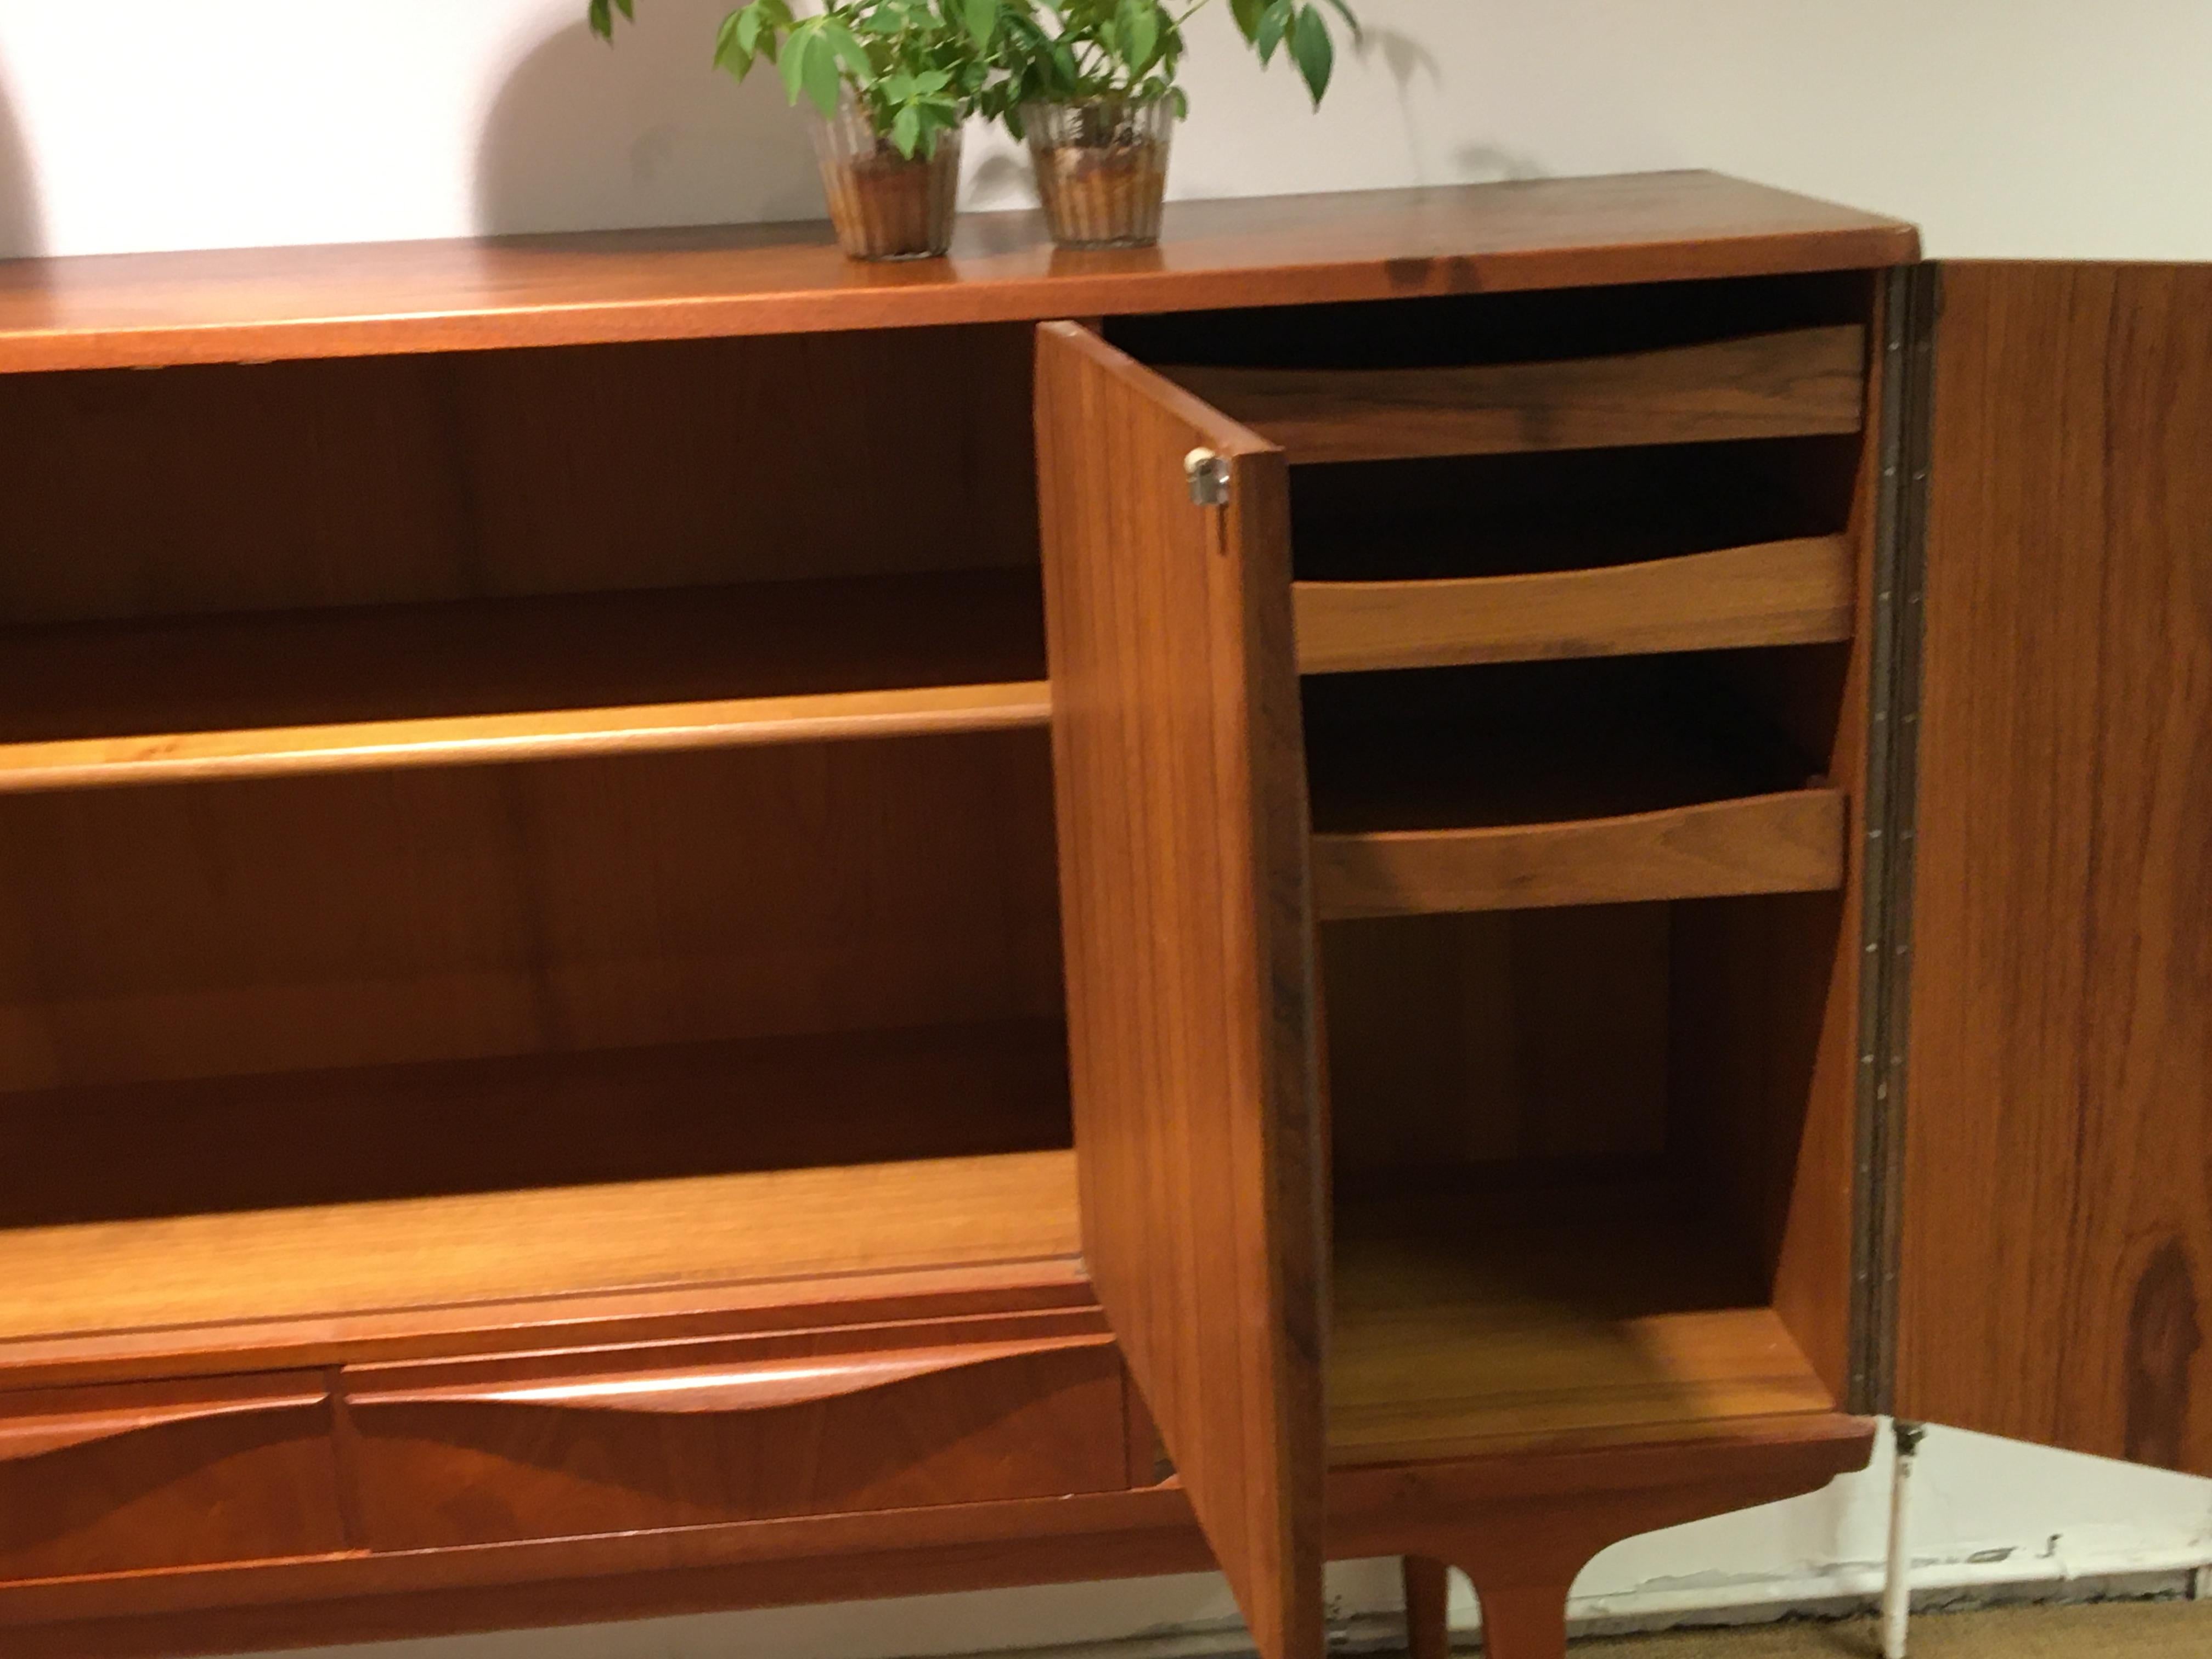 Danish Teak Sideboard by Lyby Furniture In Good Condition For Sale In Odense, Denmark